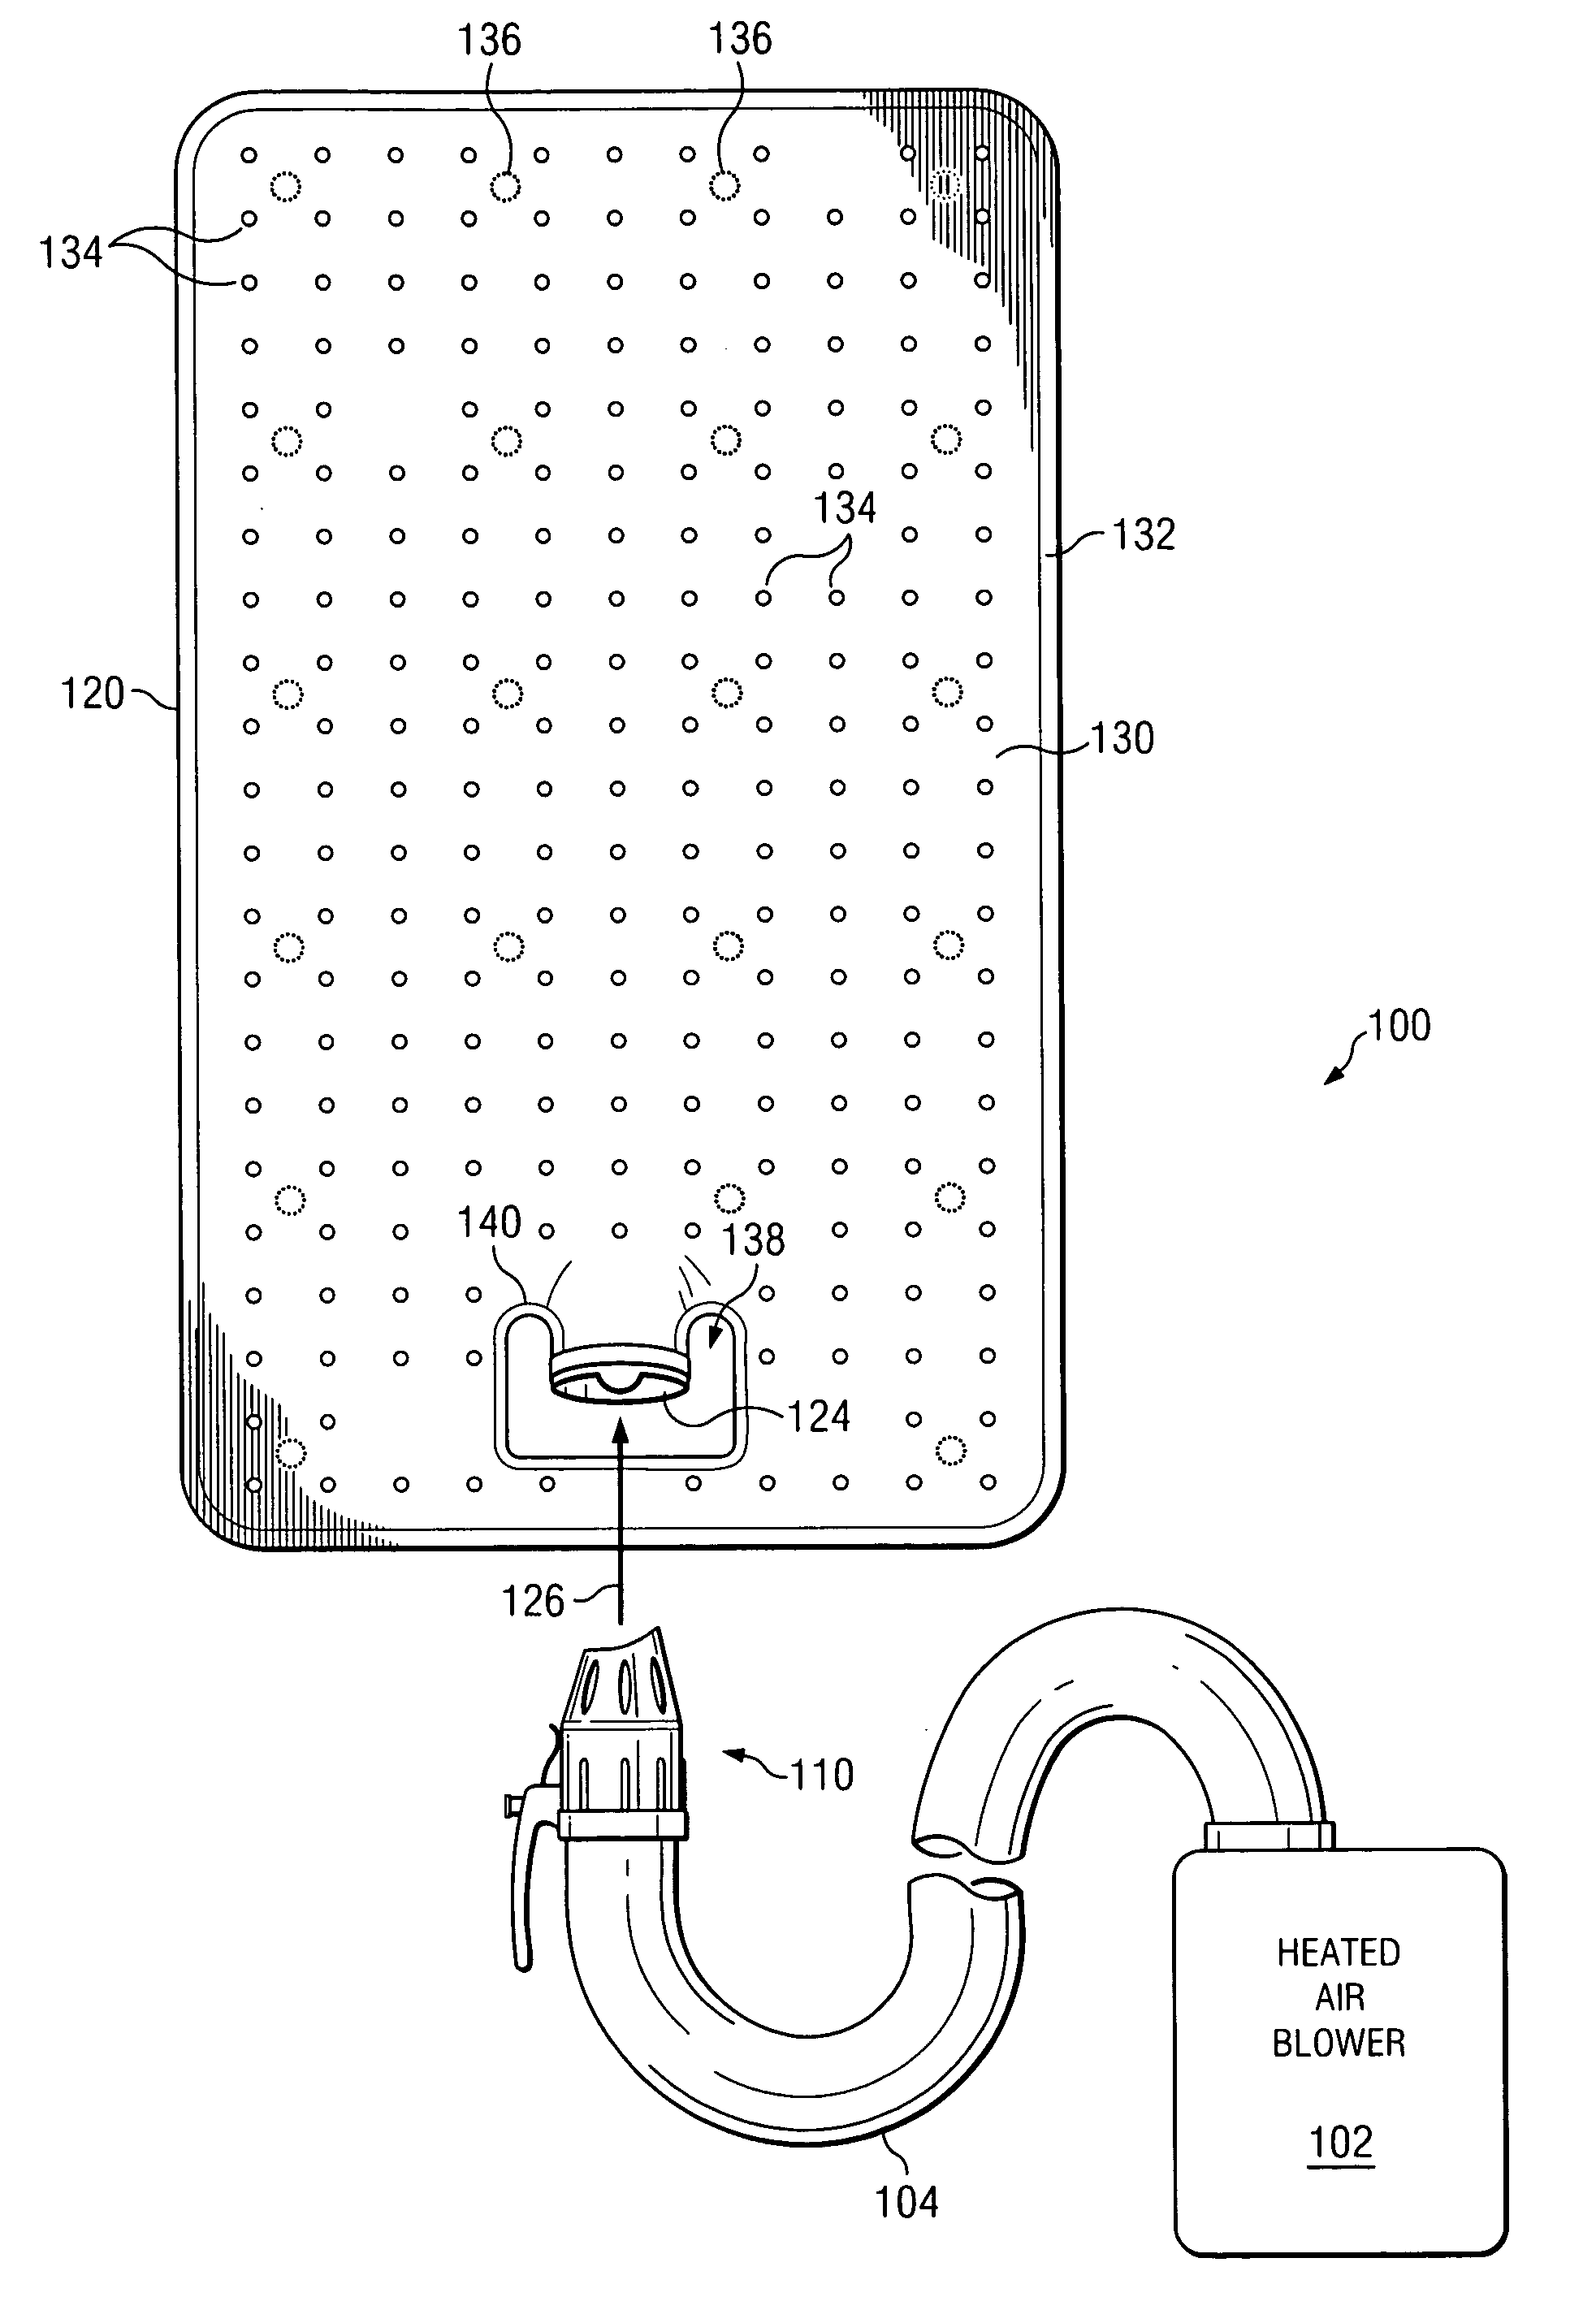 Method and apparatus for connecting a hose to a warming blanket